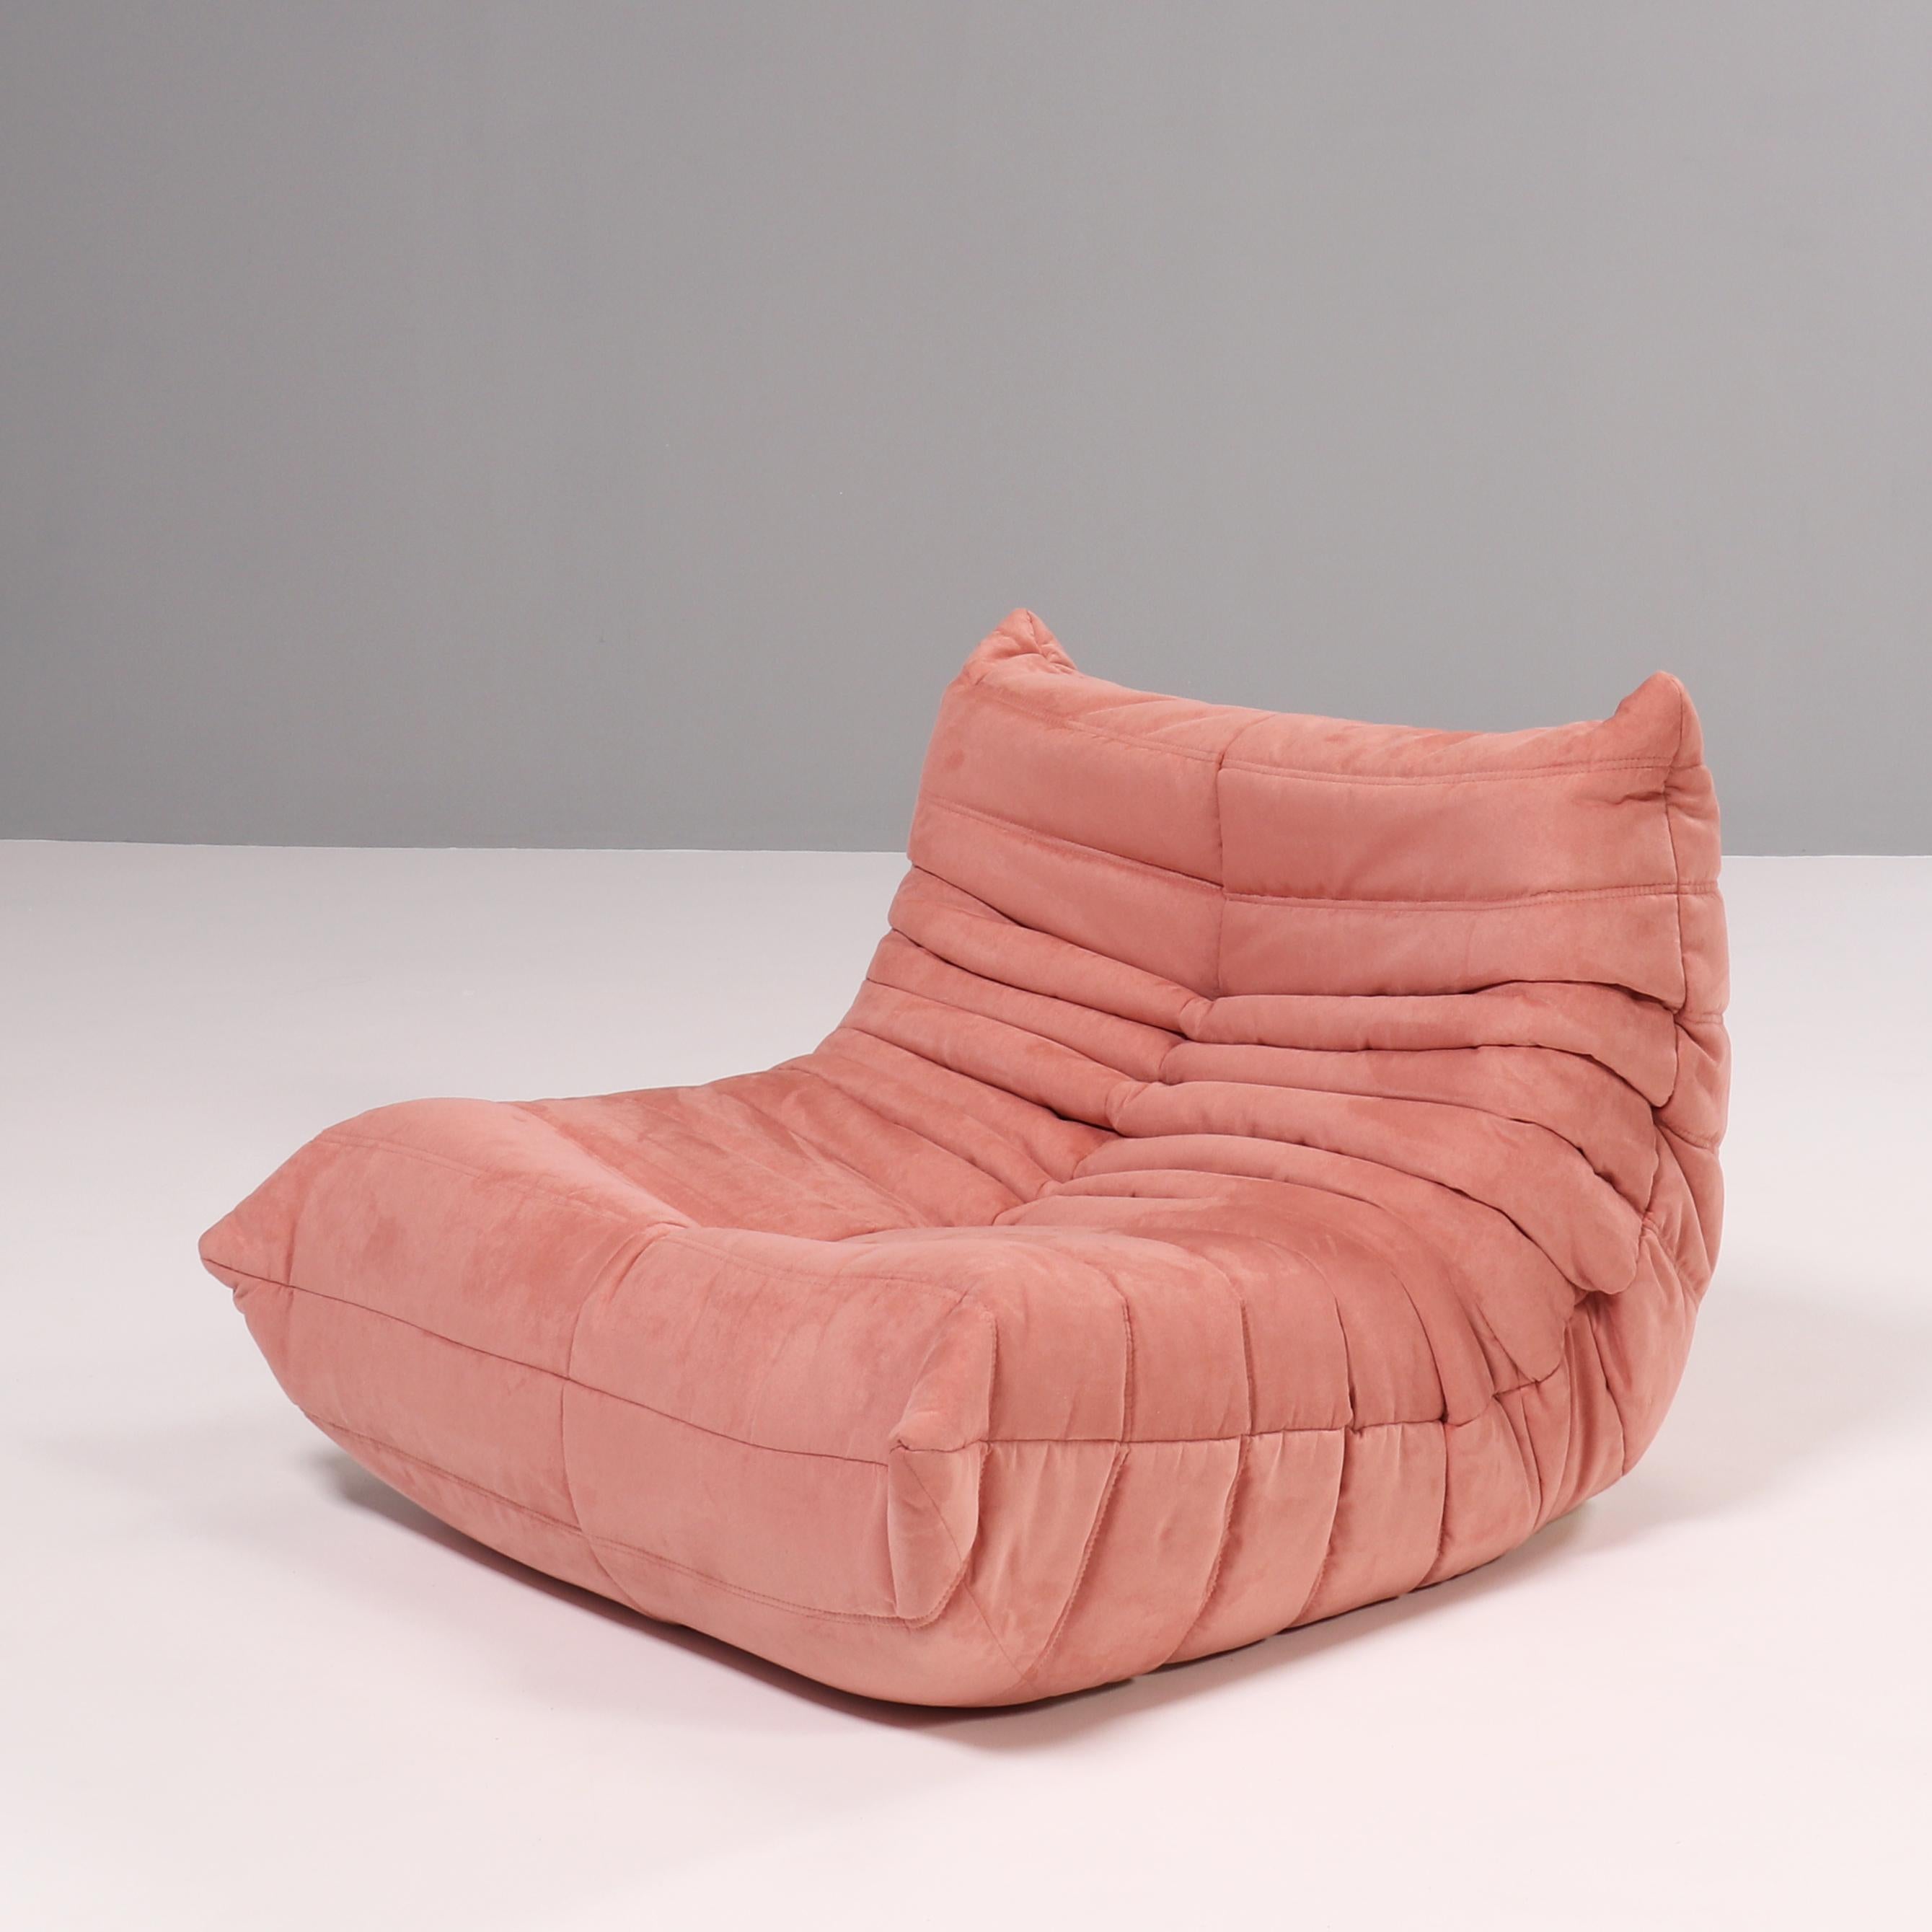 The iconic Togo pink sofa, originally designed by Michel Ducaroy for Ligne Roset in 1973, has become a design mid century Classic.

This fireside armchair and footstool is incredibly versatile and can be used alone or paired with other pieces from